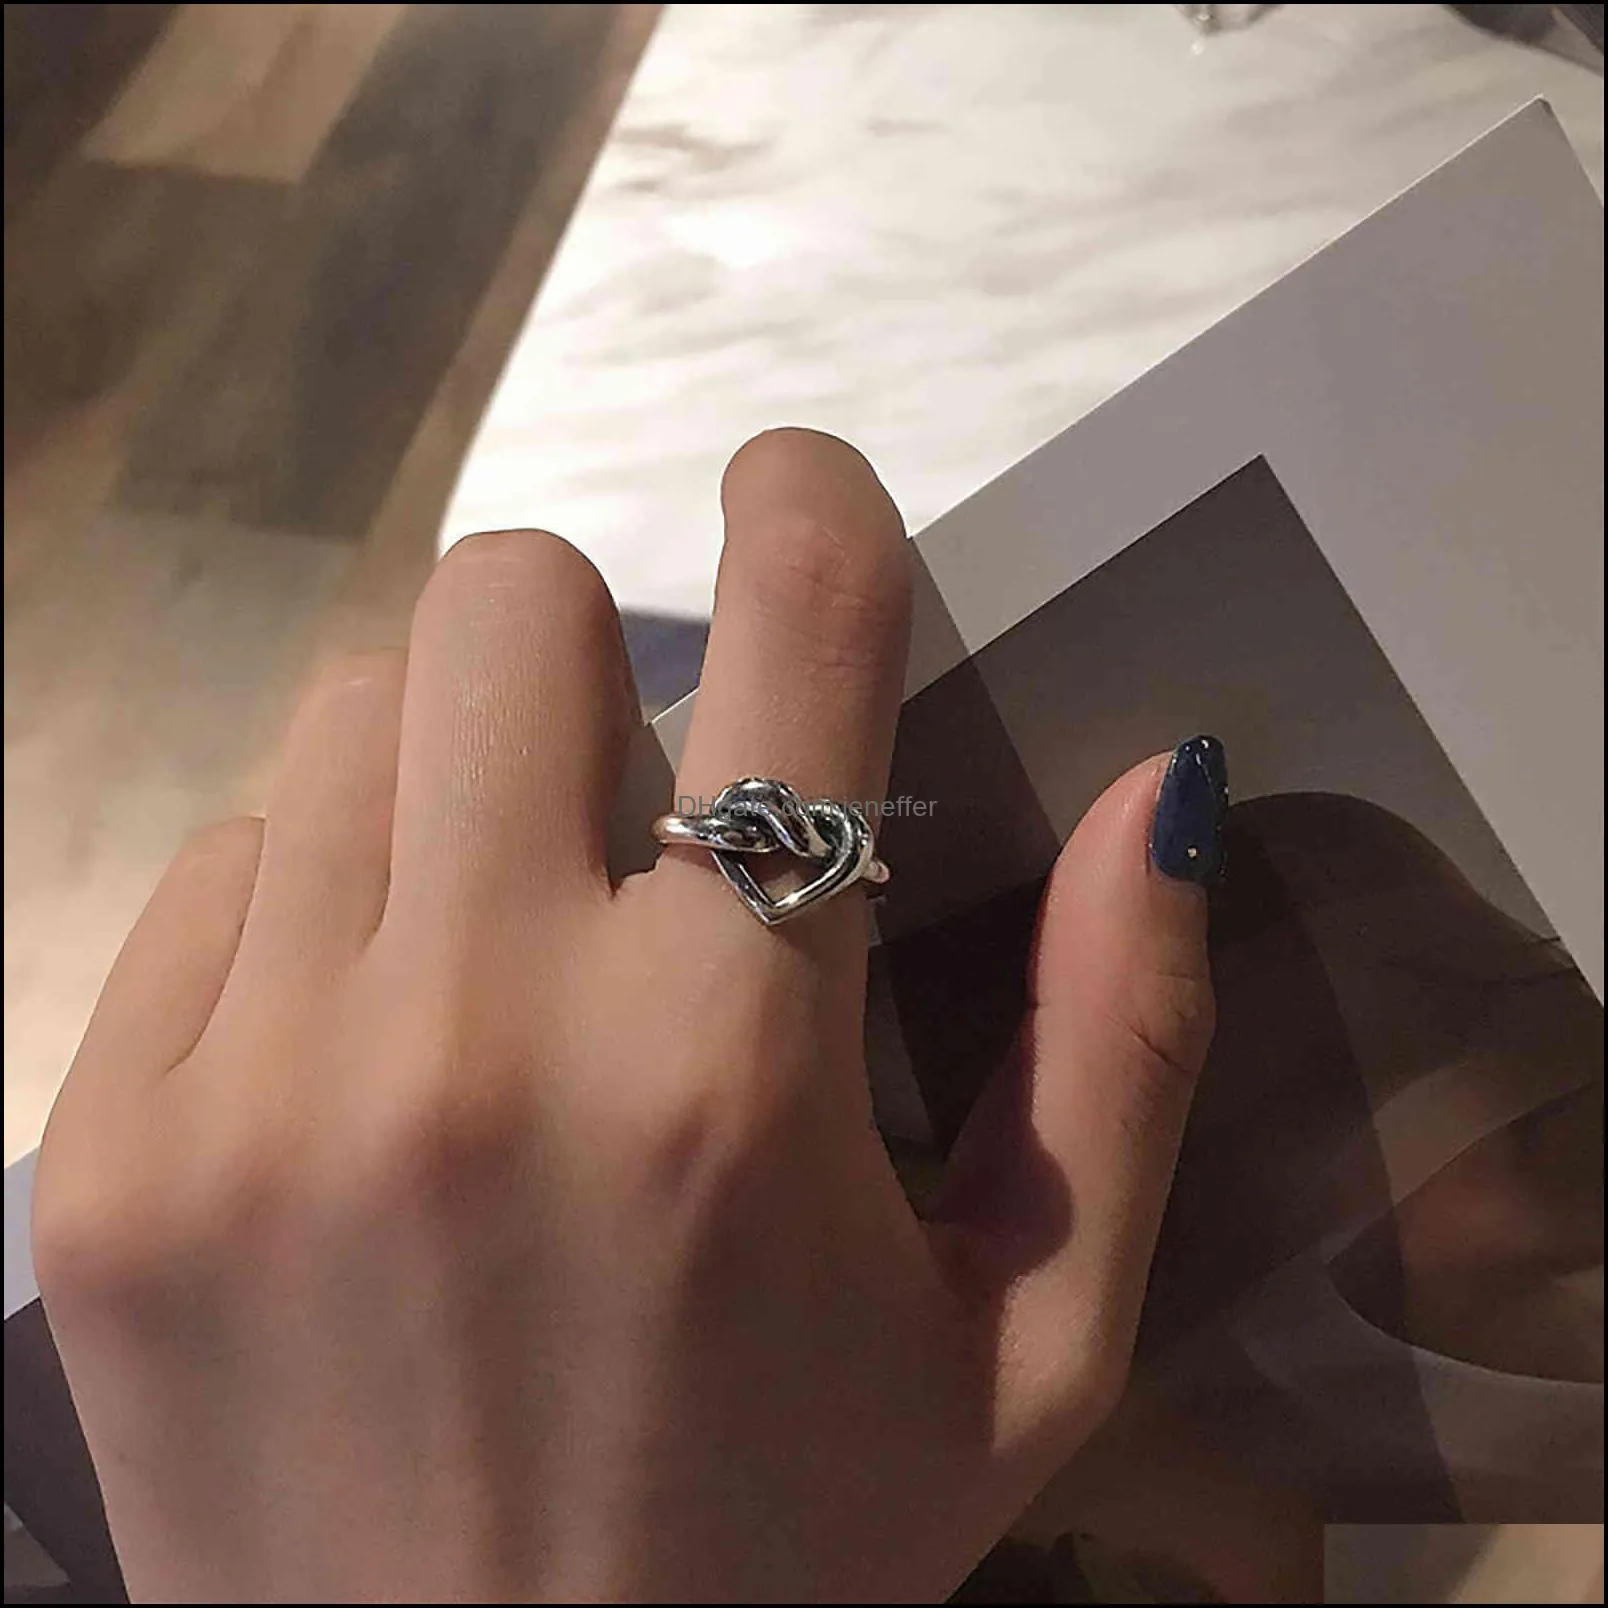 Woman StainlSteel Finger Rings Adjustable Heart Shape Rings For Women Aneis Fine Jewelry 2021 Trend Creative Love Knot Ring Y0420